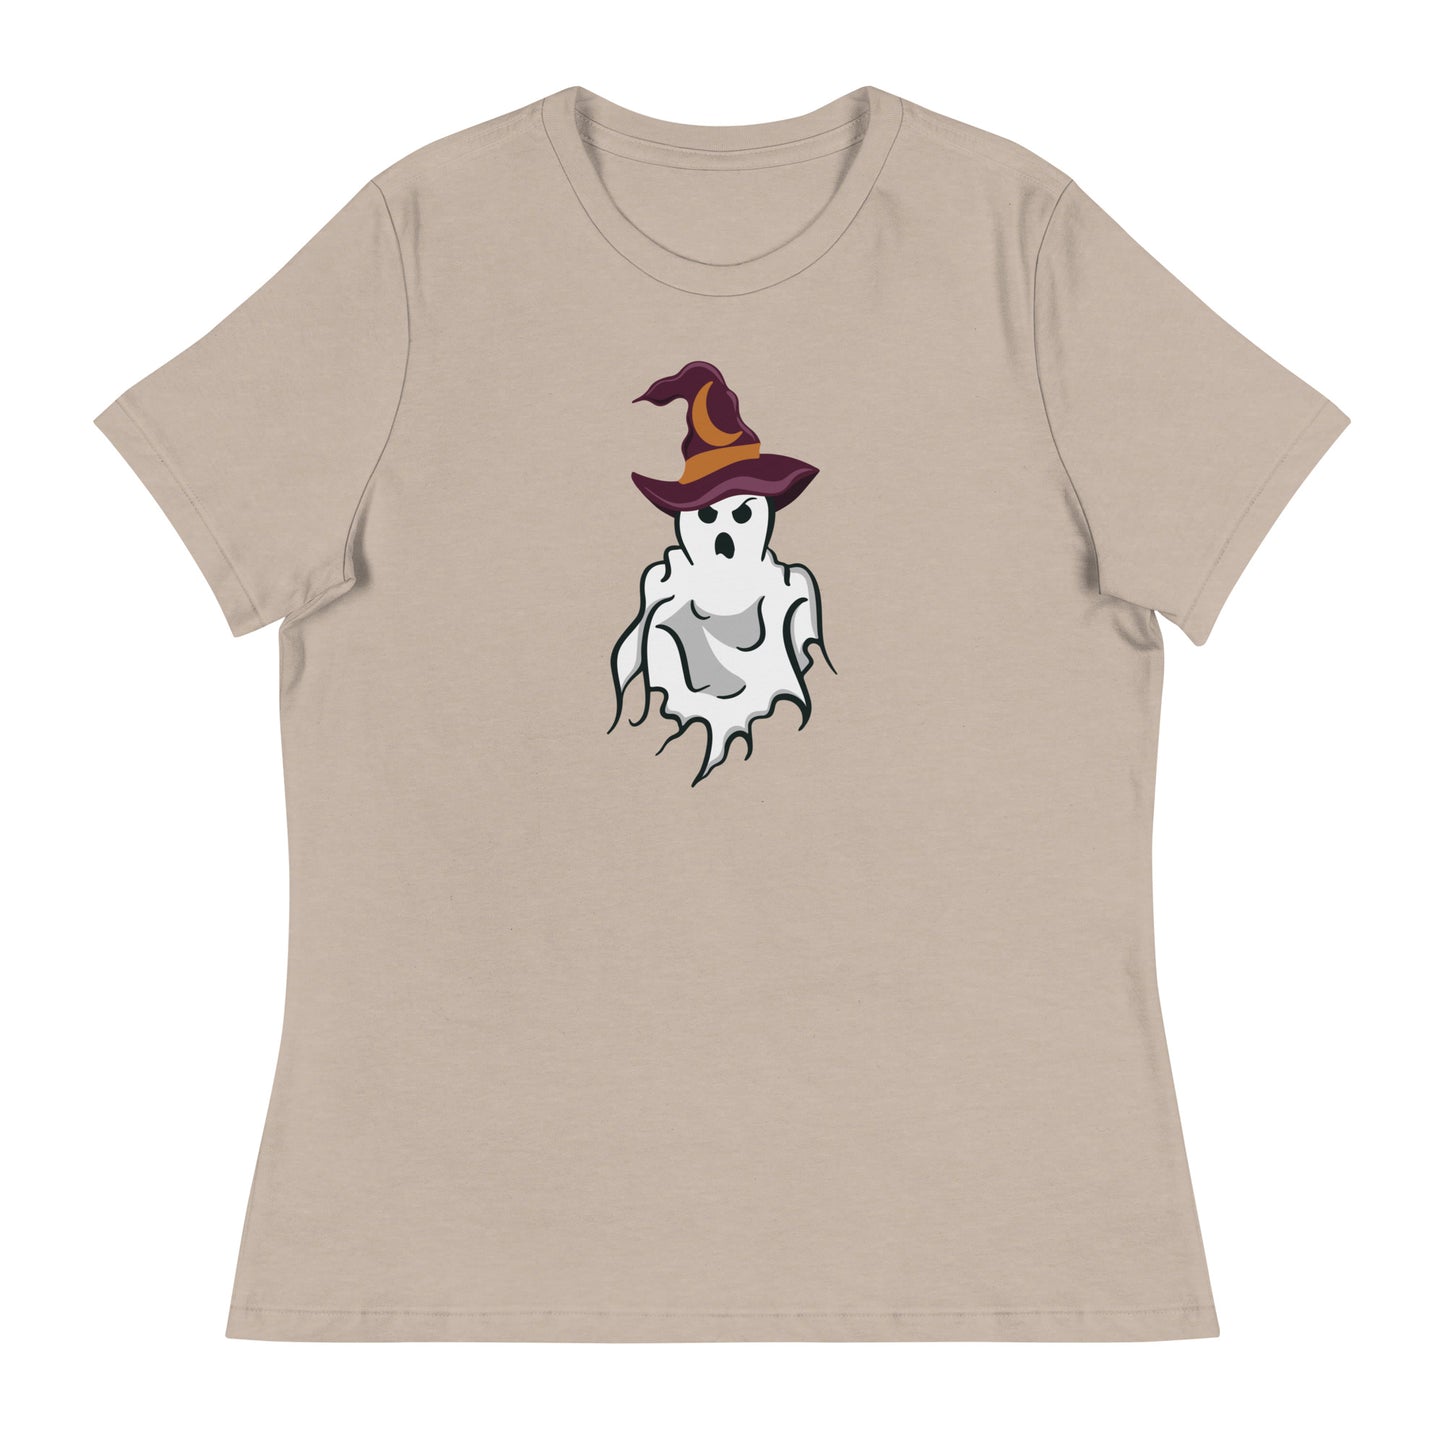 Shirt featuring a ghost wearing a witch hat